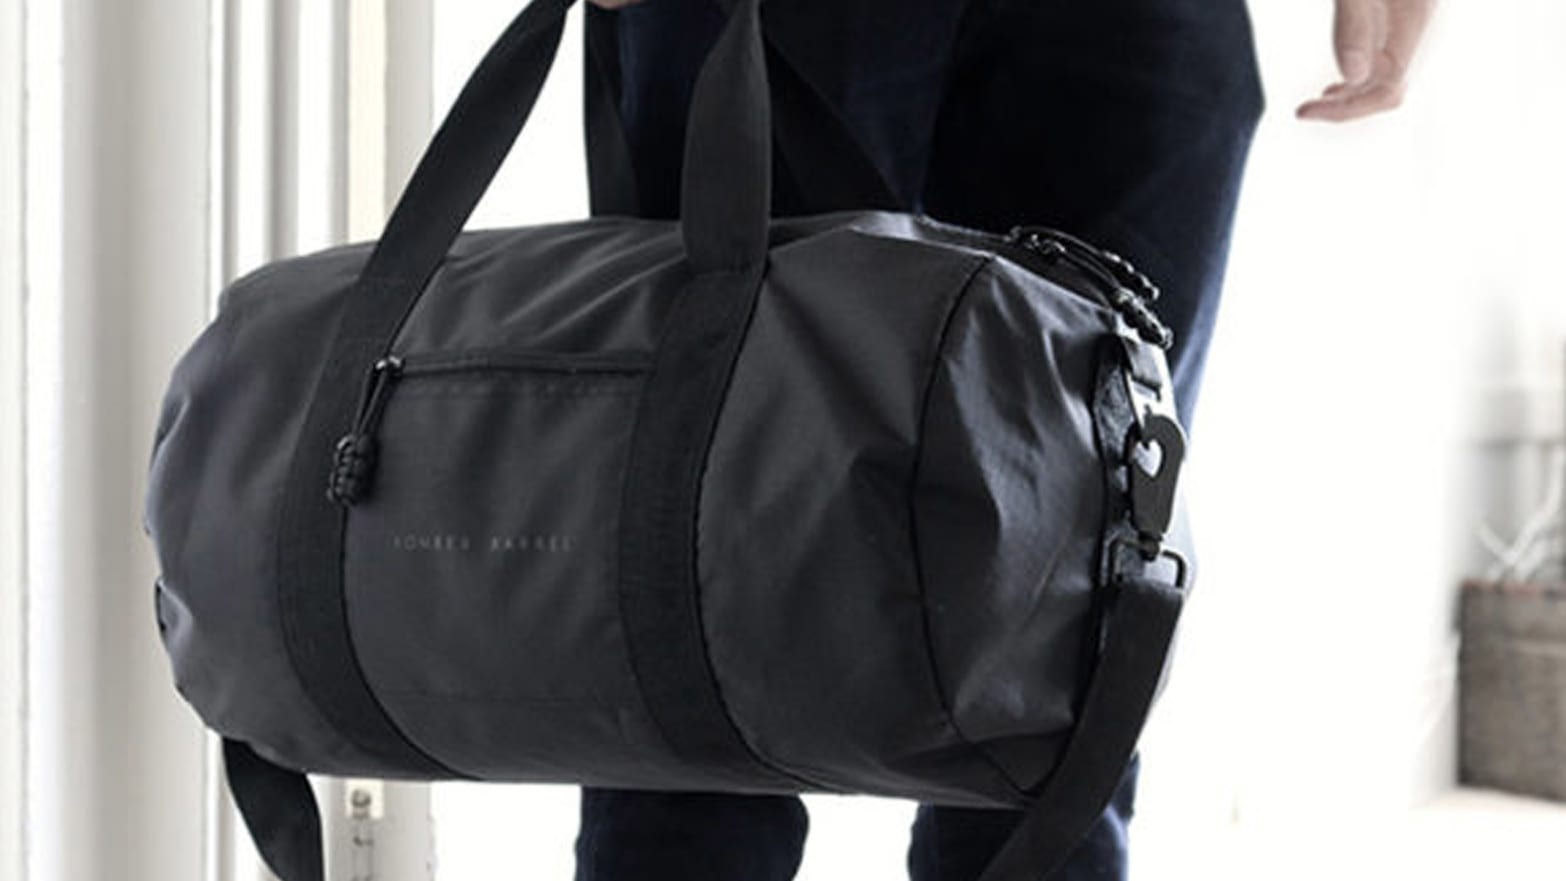 Get This Deal On Kickstarter's Most Funded Duffel Bag